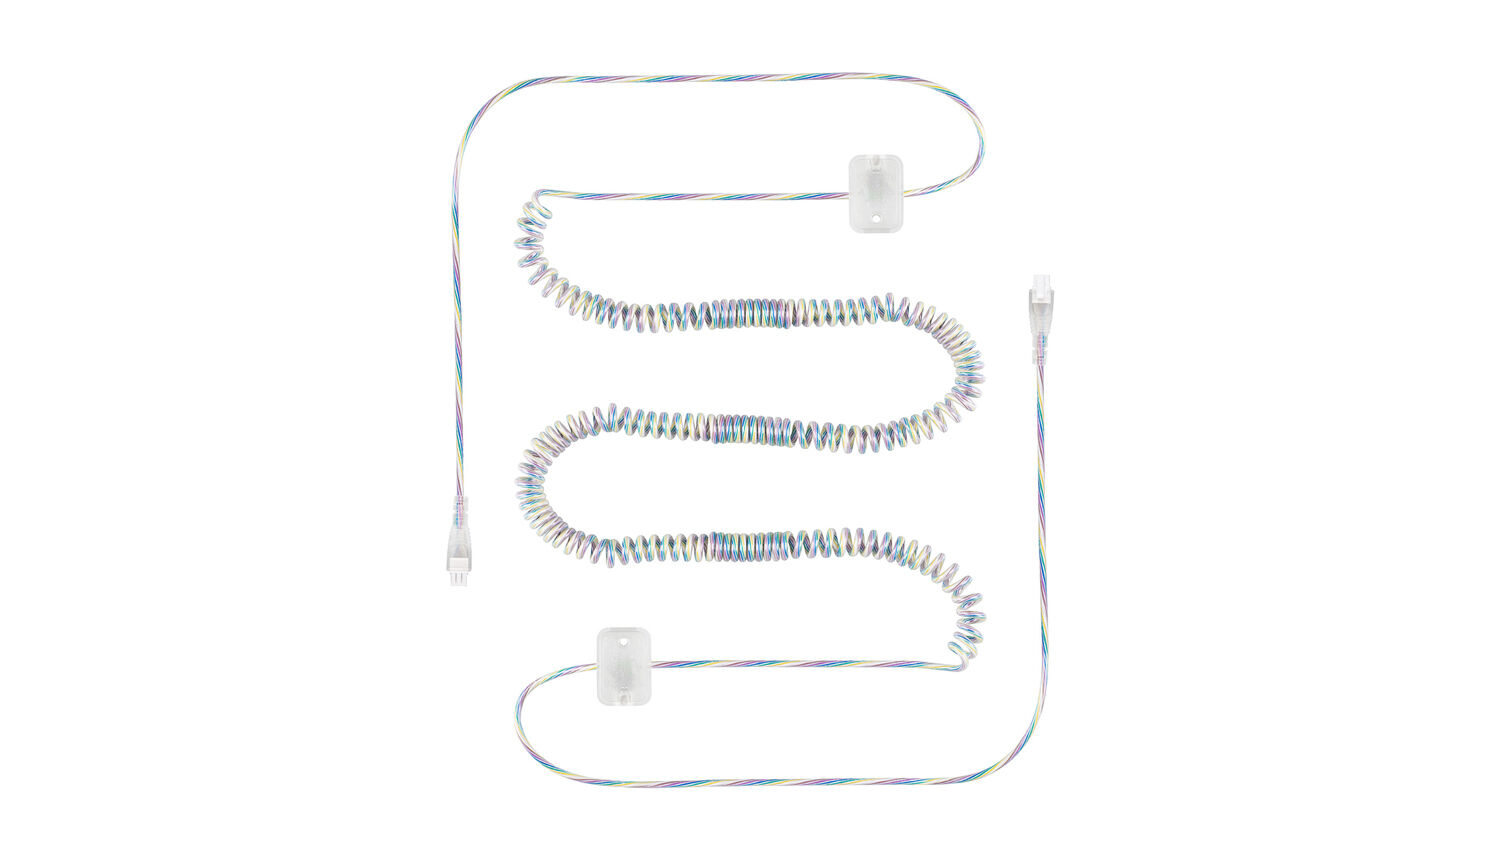 Top view of the complete Cosy2Go Sync-Cable